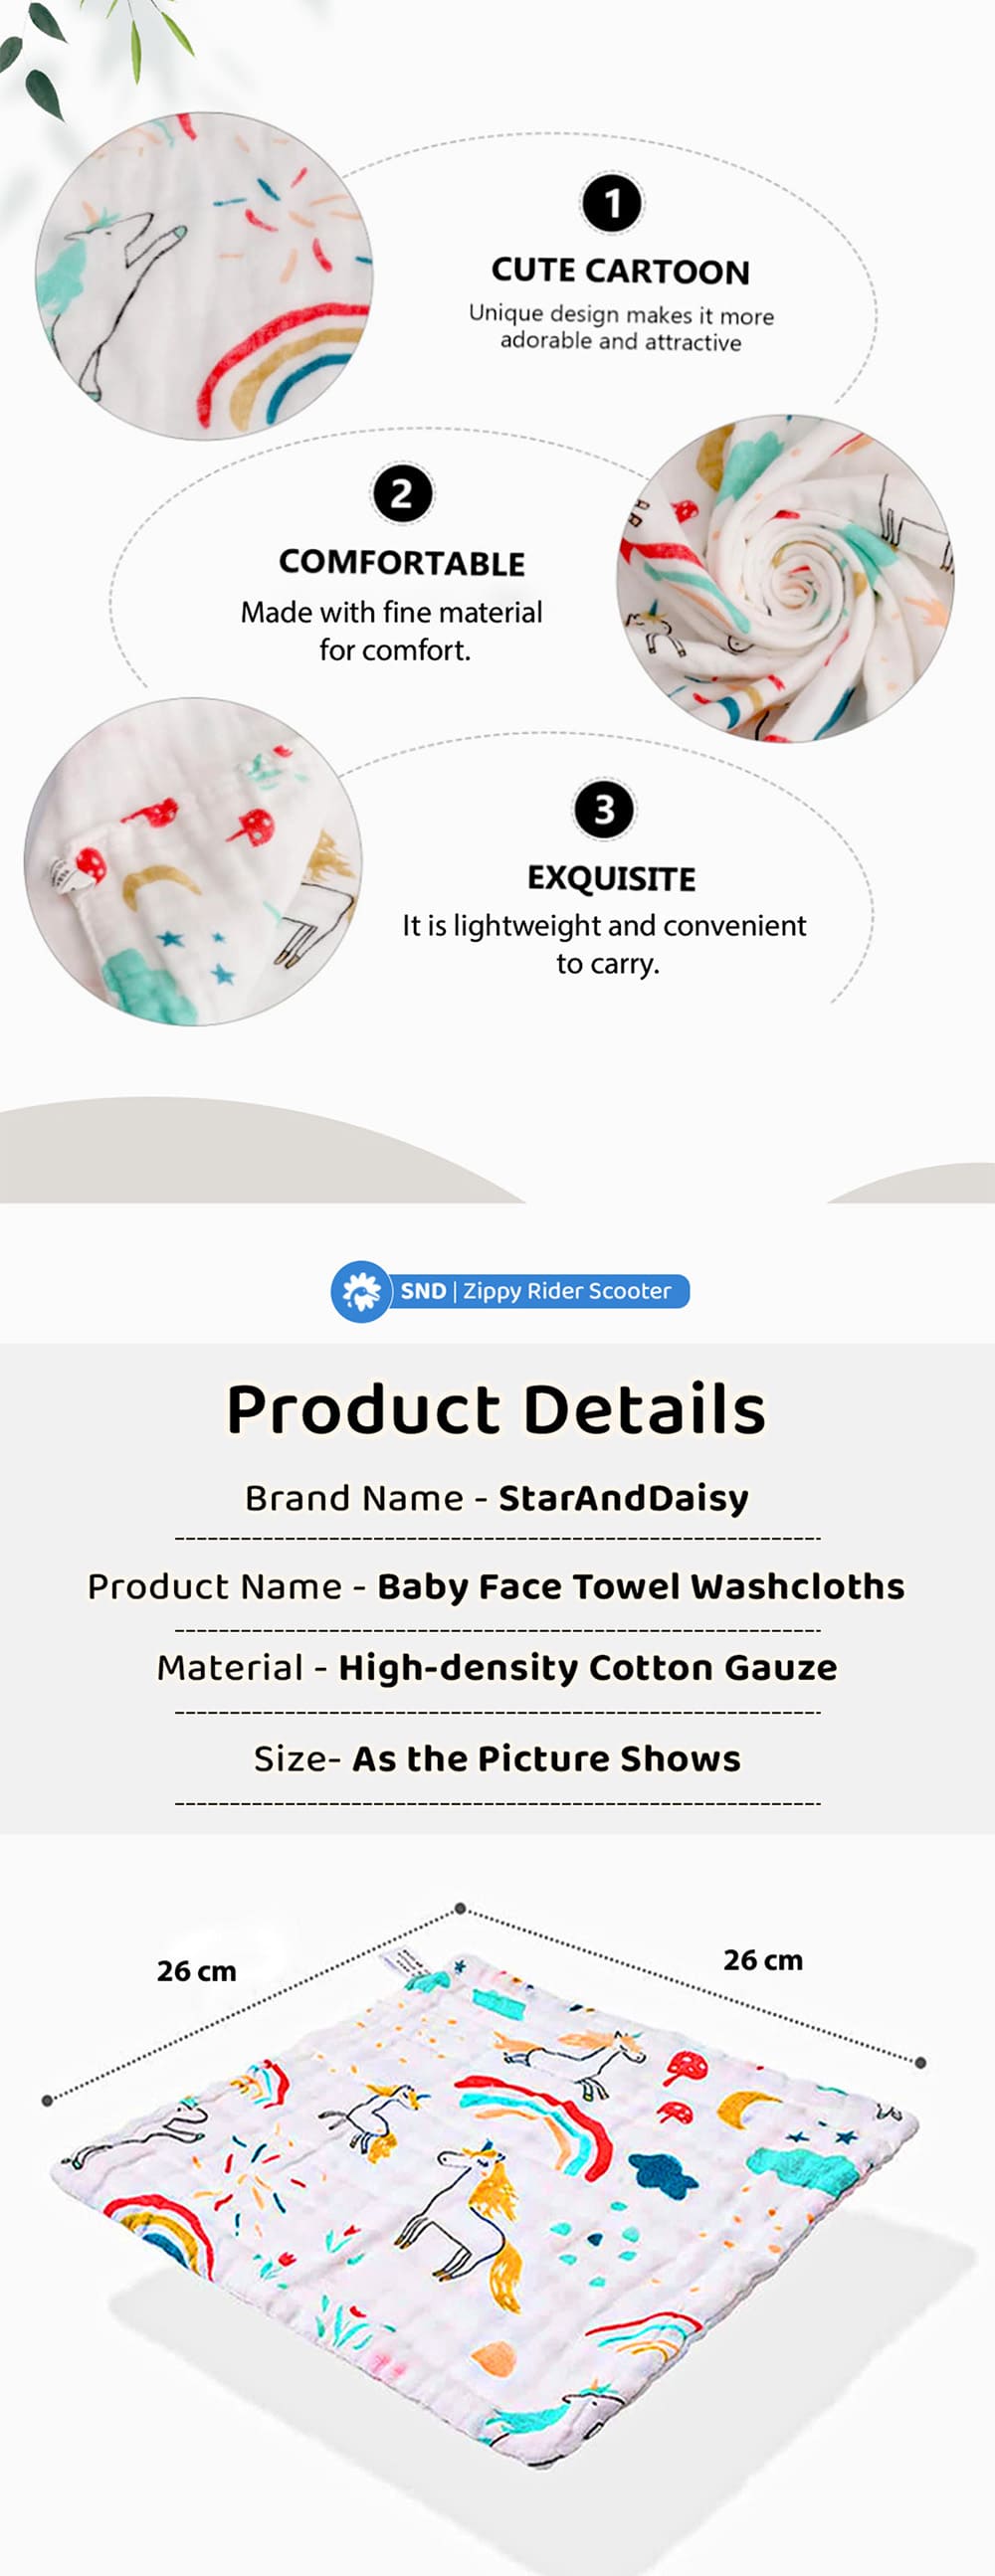 Specification of Baby Face Towel